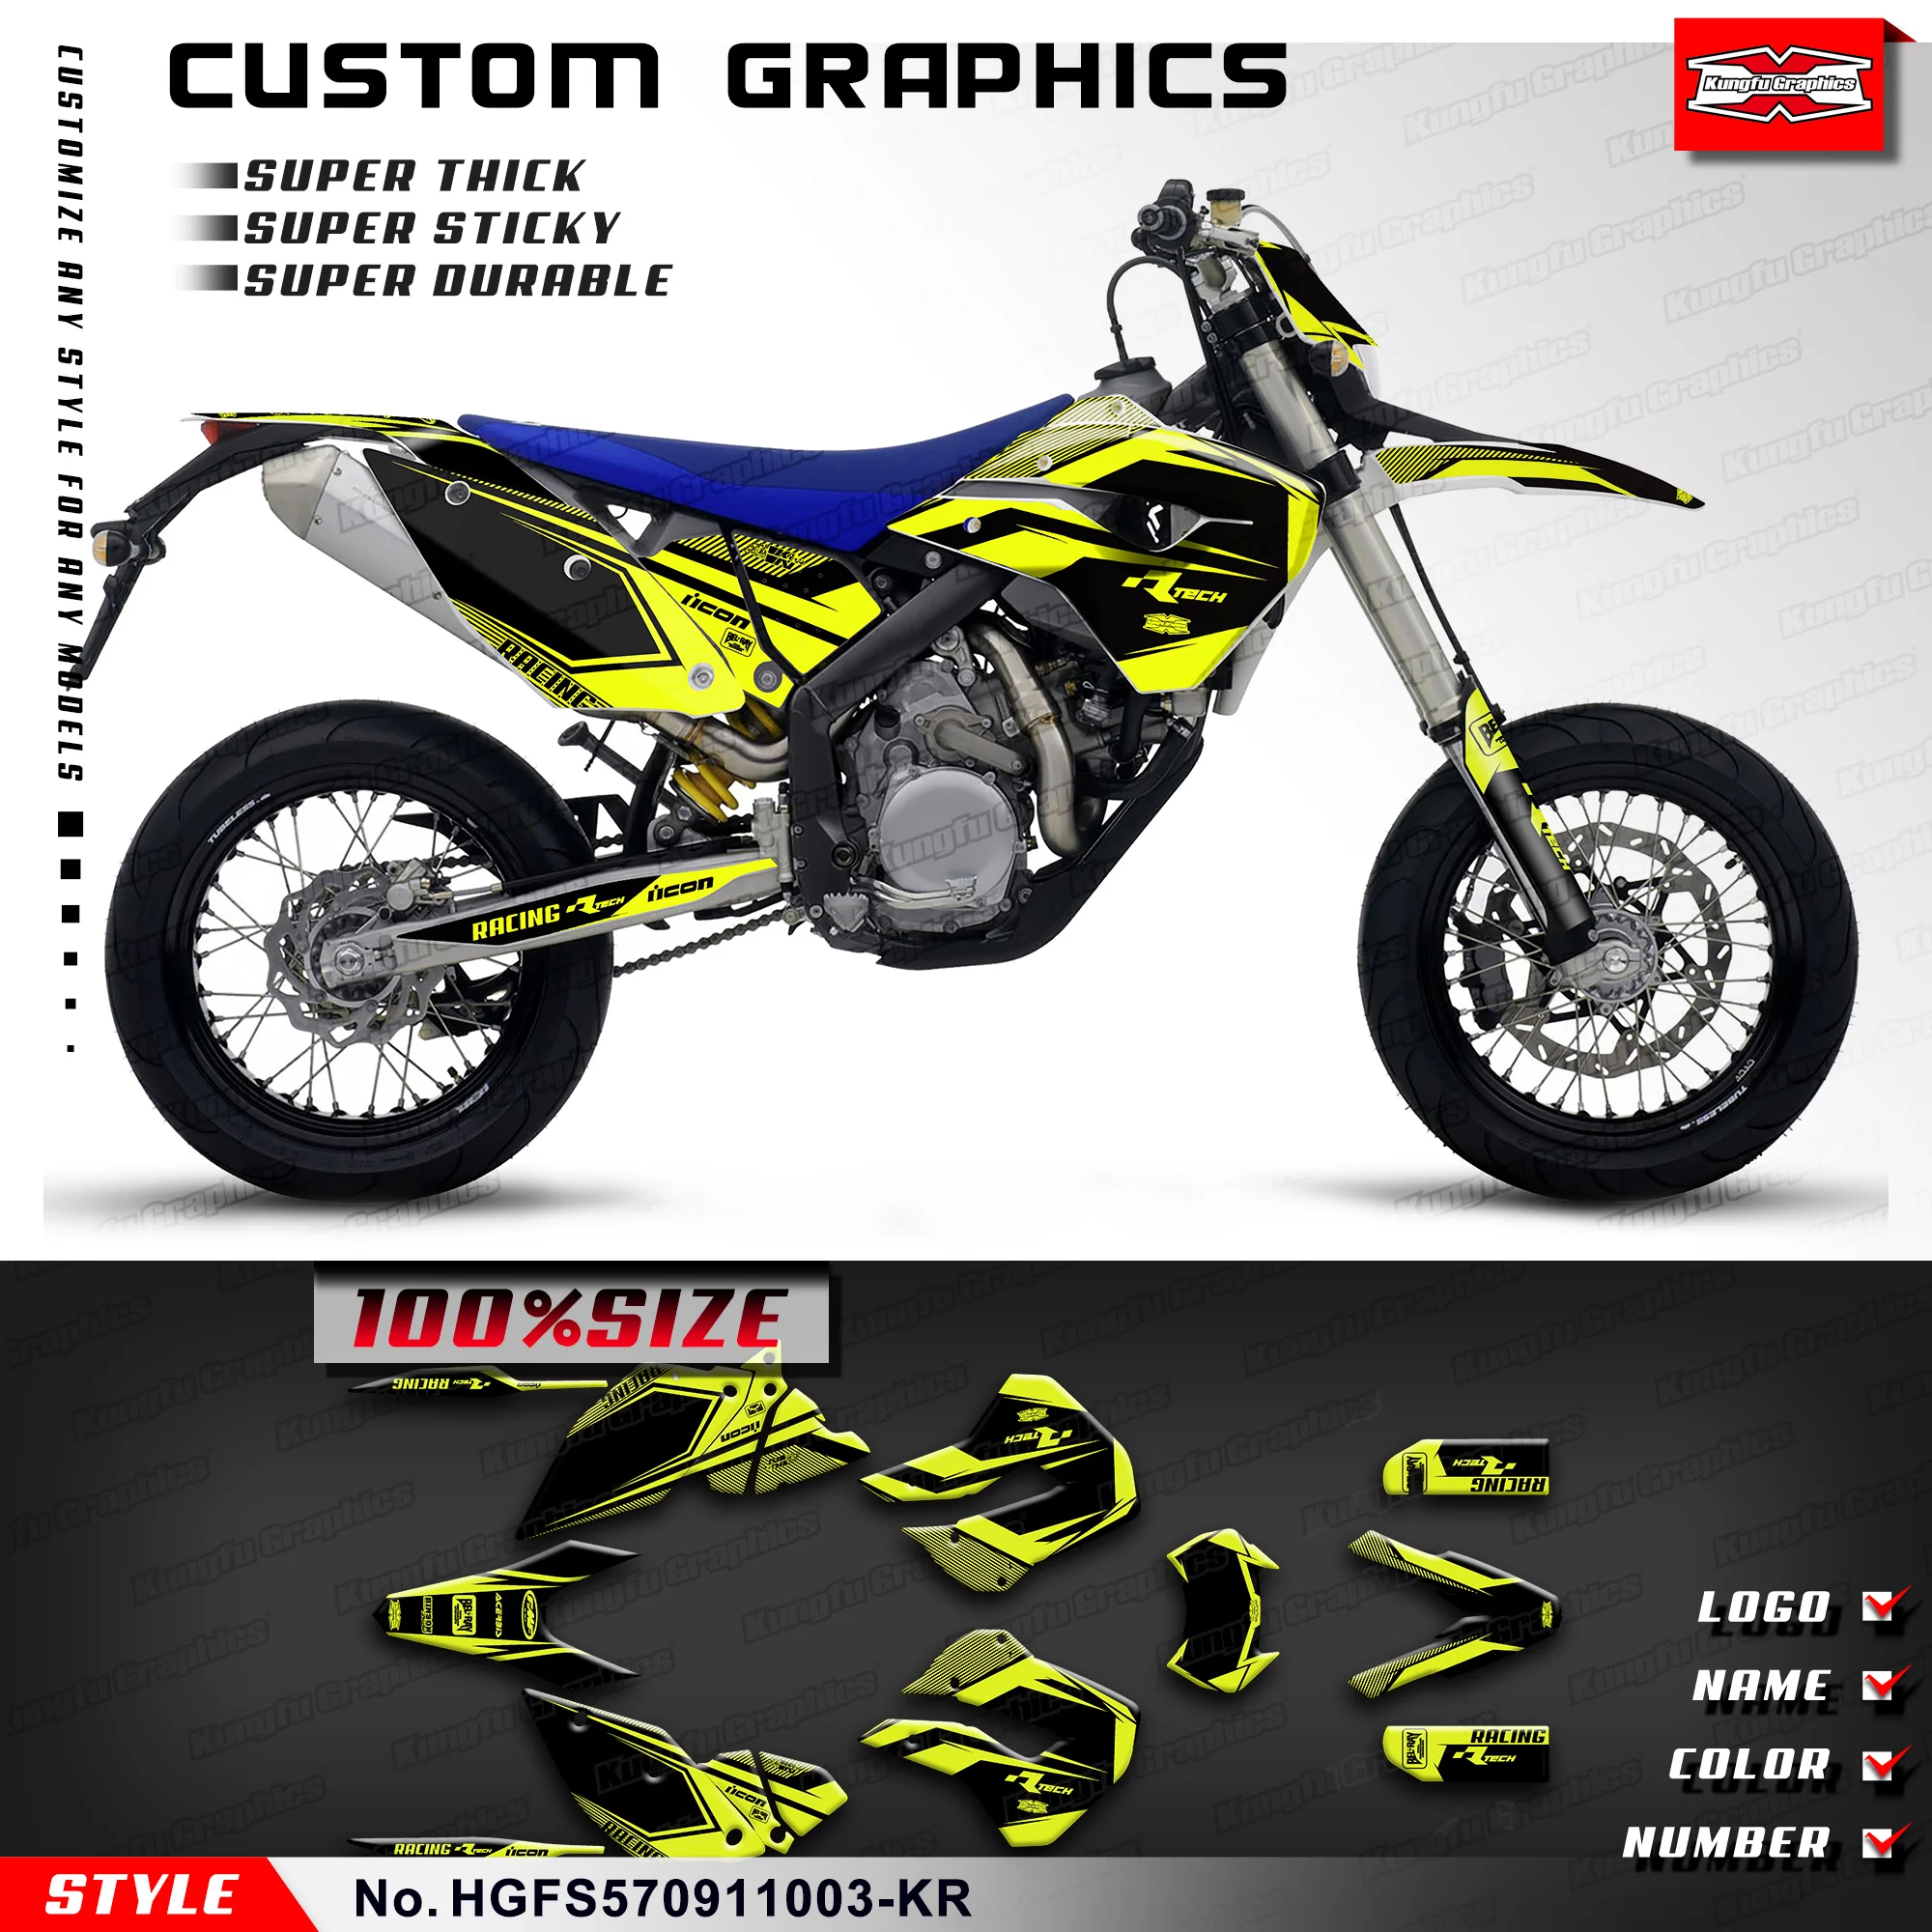 

KUNGFU GRAPHICS Decals Stickers Skin Graphics for Husaberg FS 570 2009 2010 2011, HGFS570911003-KR